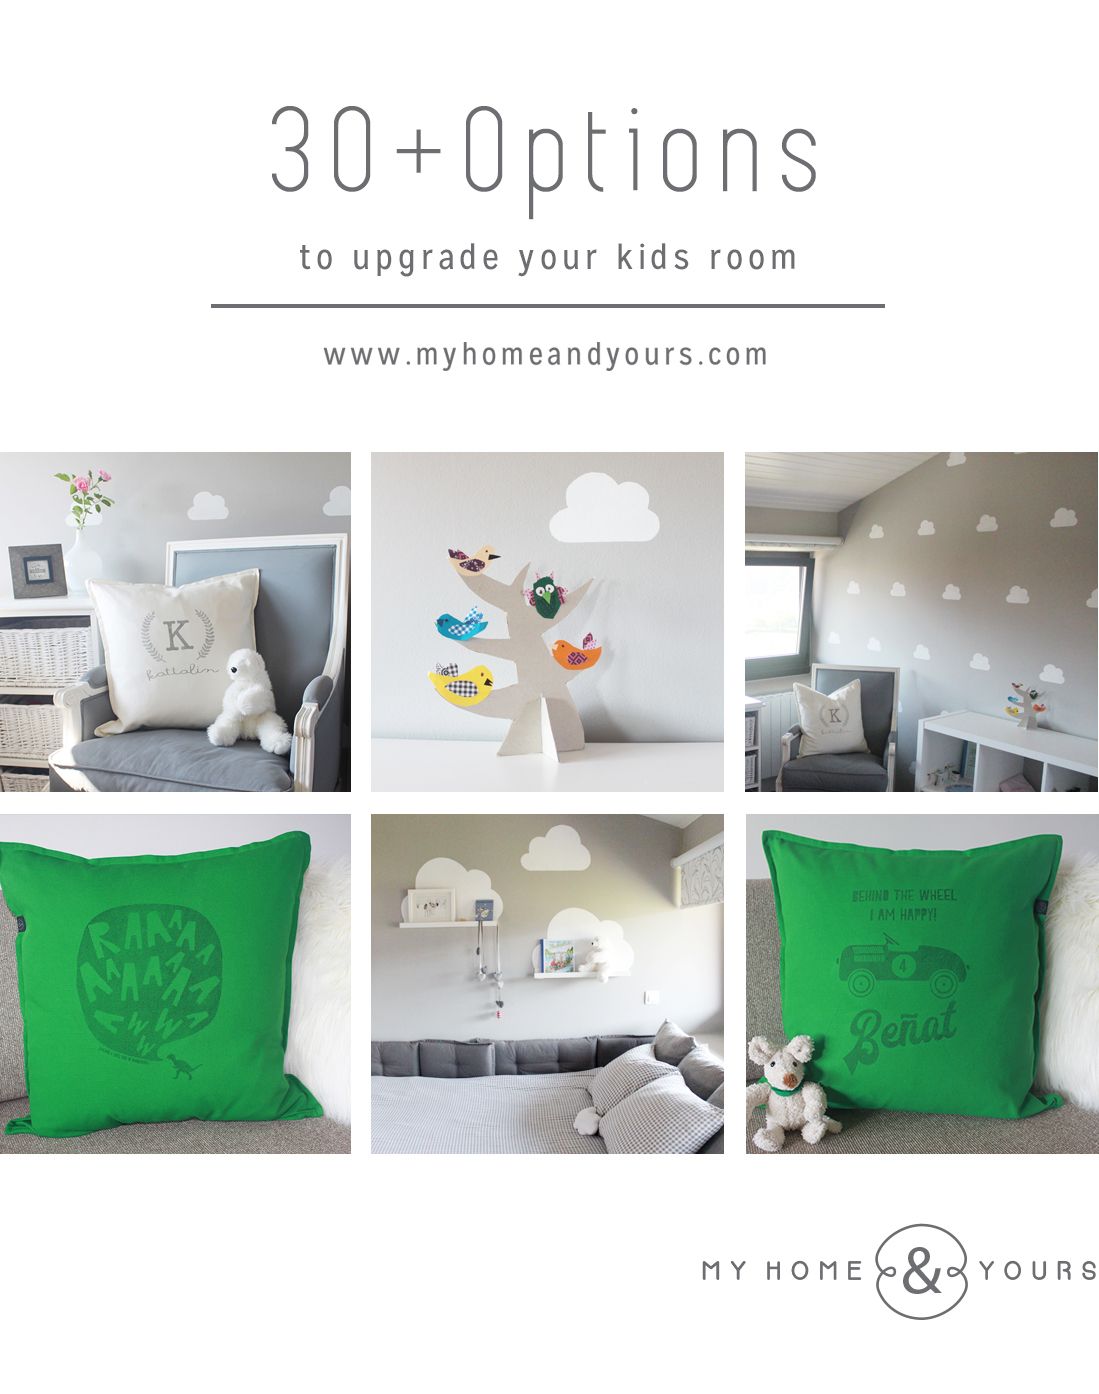 30-options-to-upgrade-your-kids-room-by-My-Home-and-Yours-blog